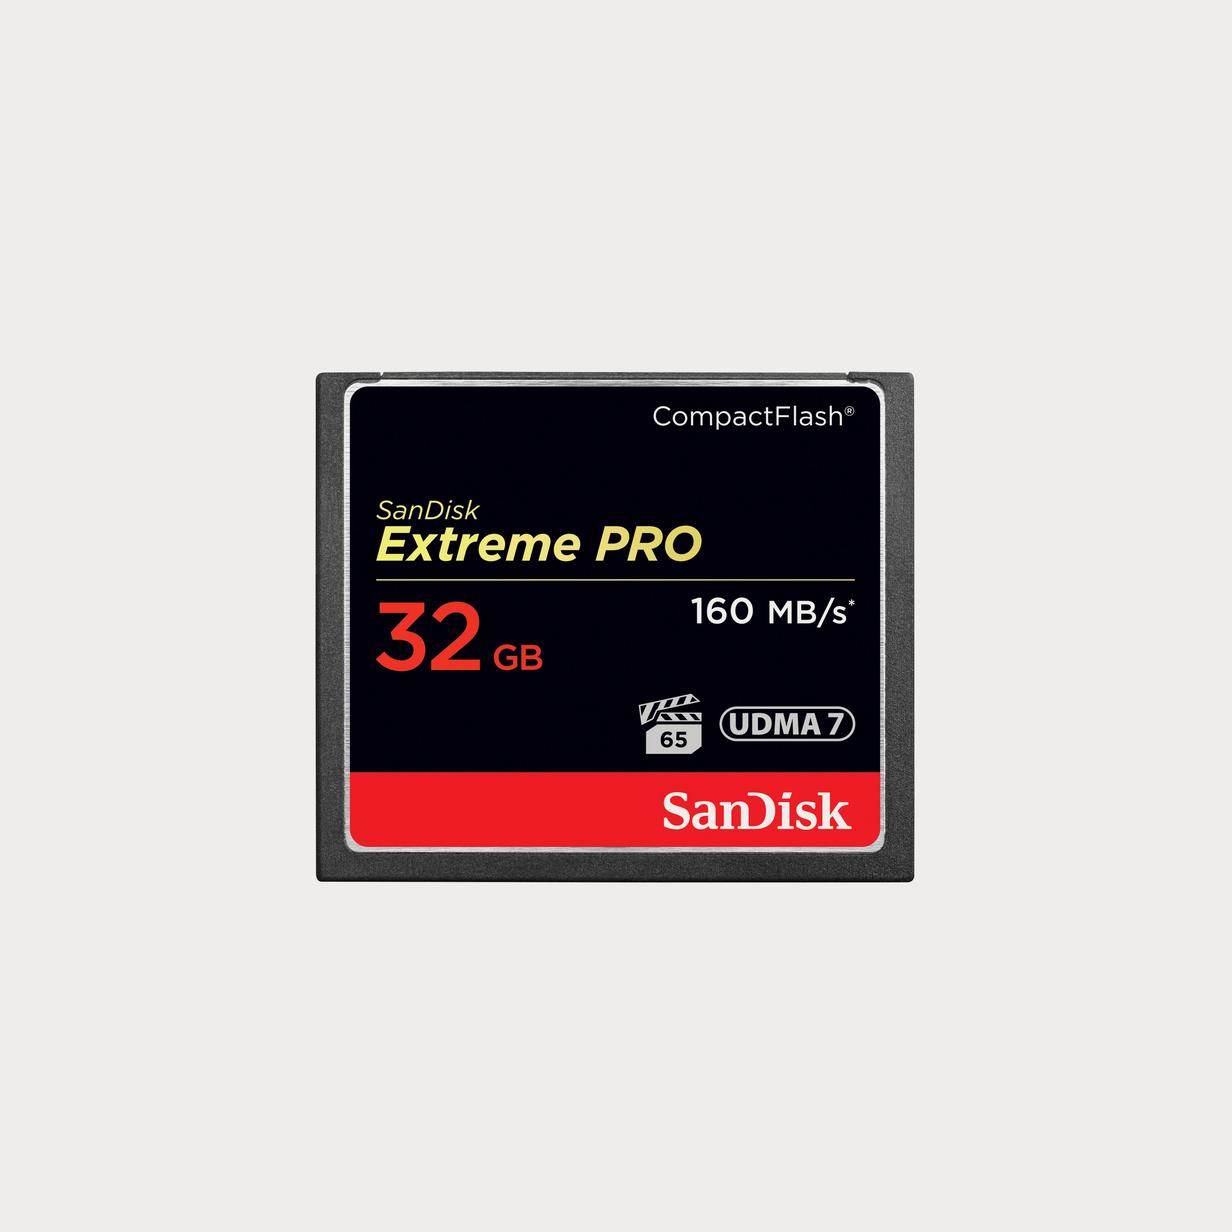 Moment sandisk SDCFXPS 032 G A46 Extreme Pro Compact Flash Memory Card 32 GB 01